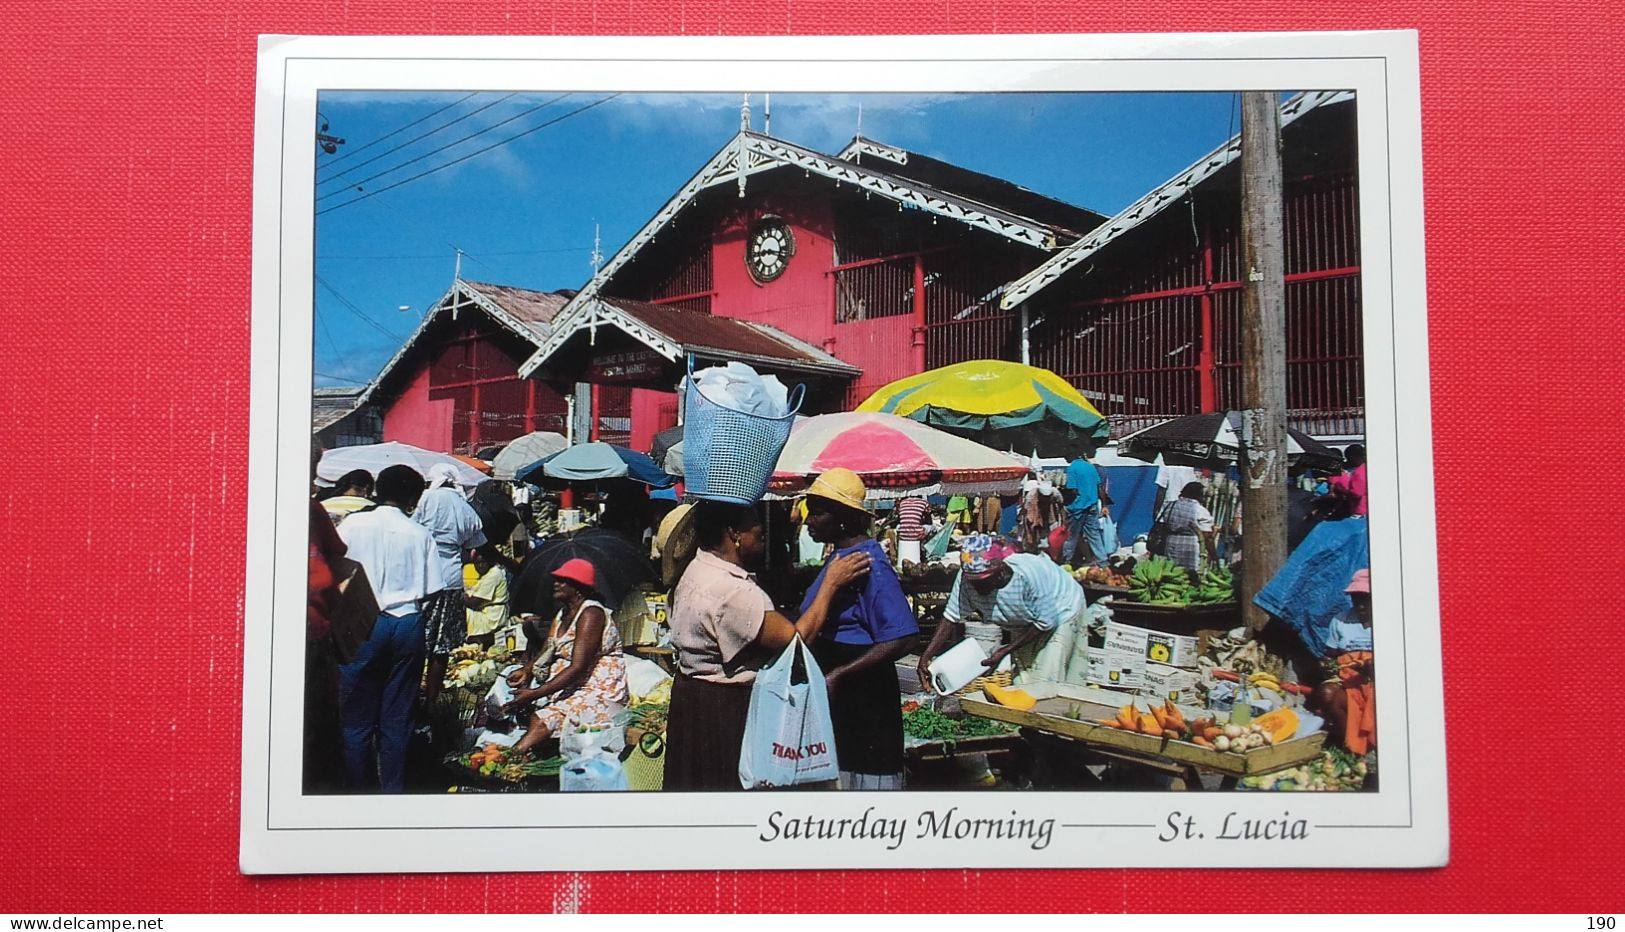 Saturday Morning.Time For A Chat On Market Day - Saint Lucia